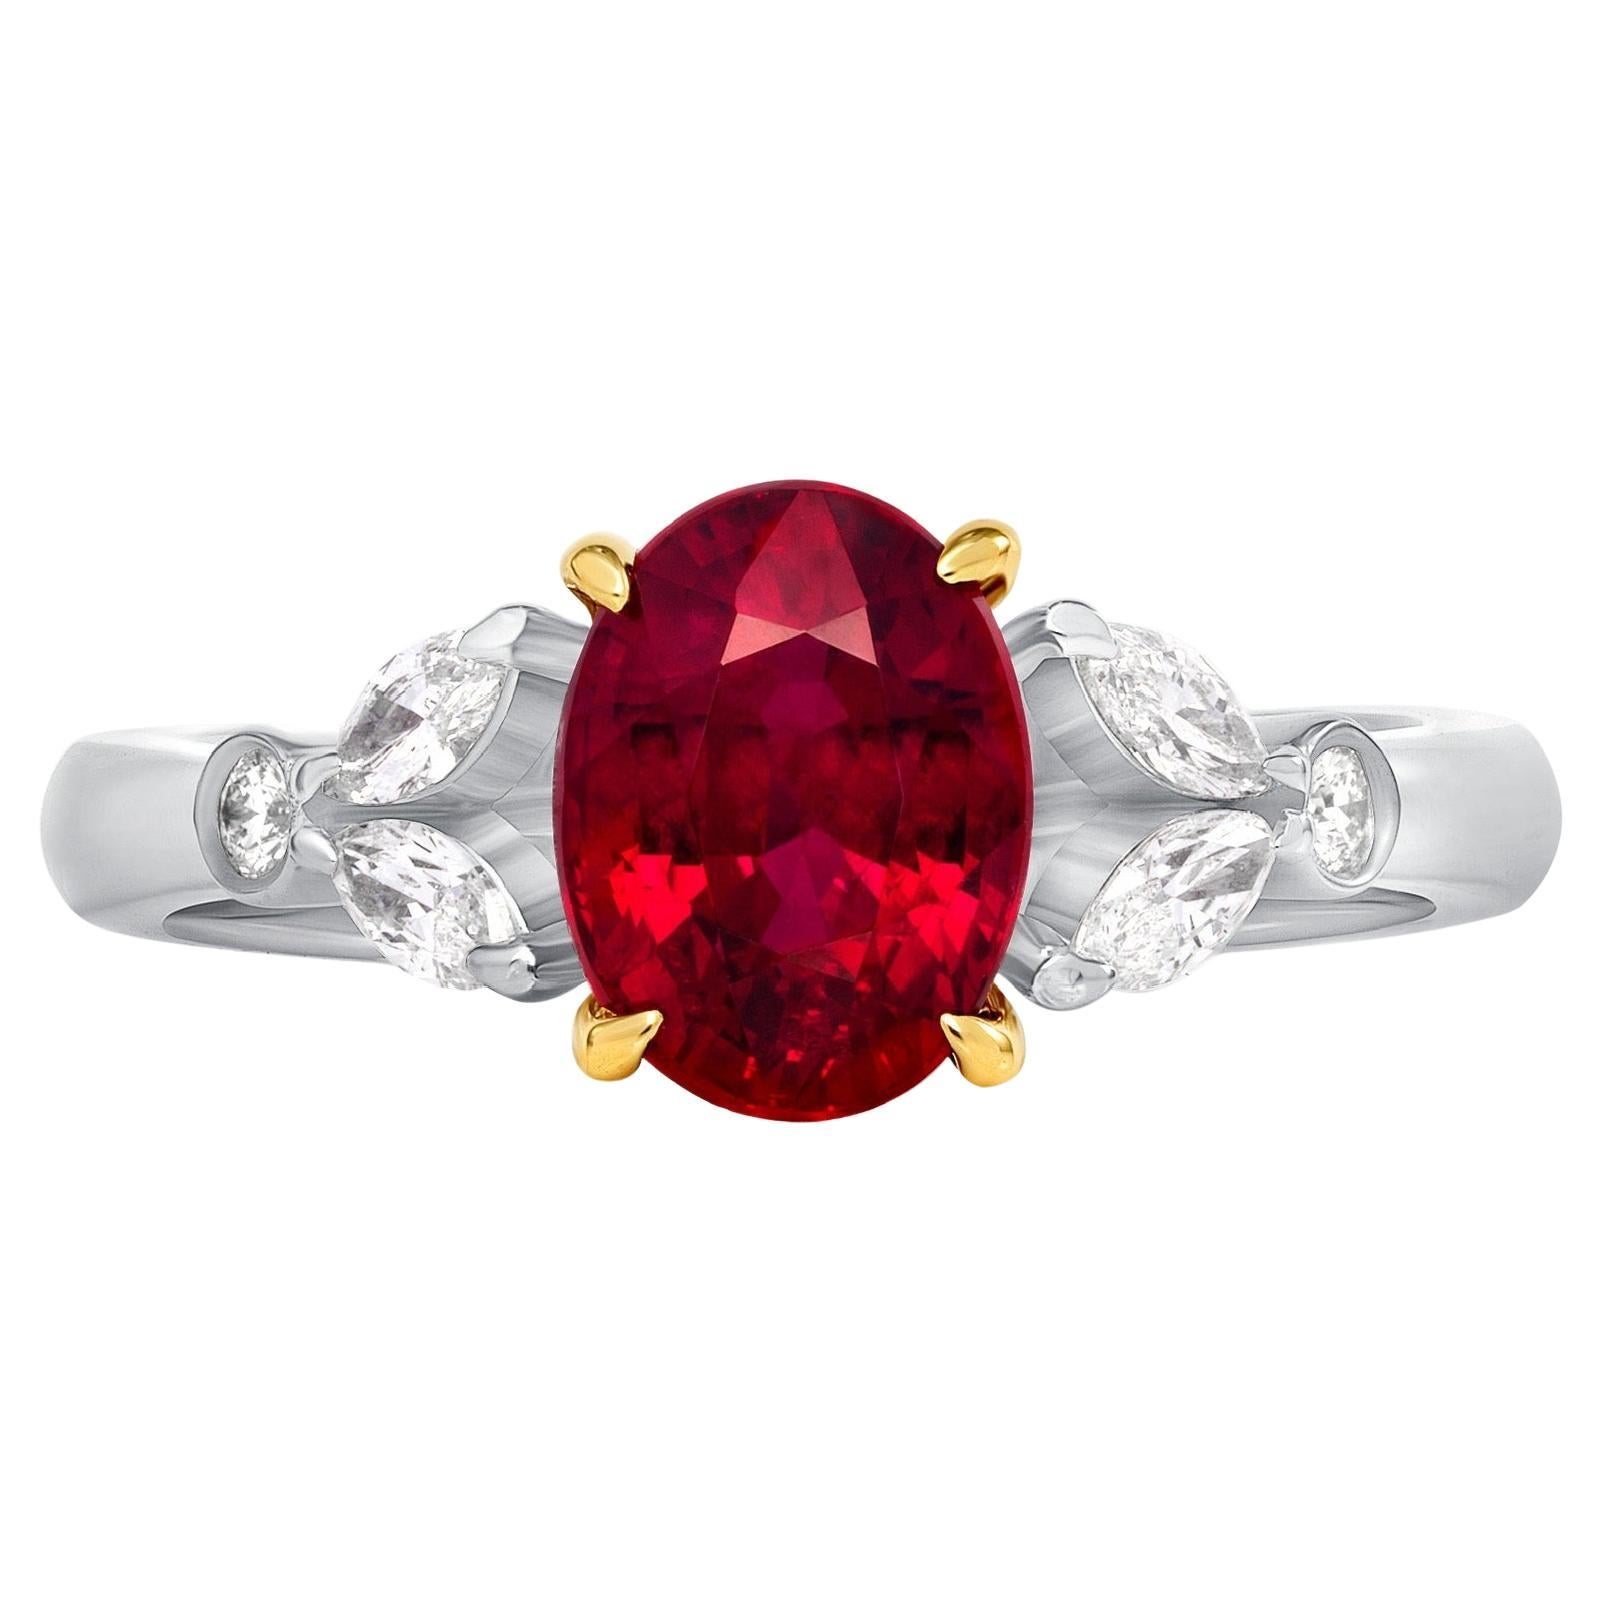 2.03ct oval, Mozambique Ruby ring. GIA certified.